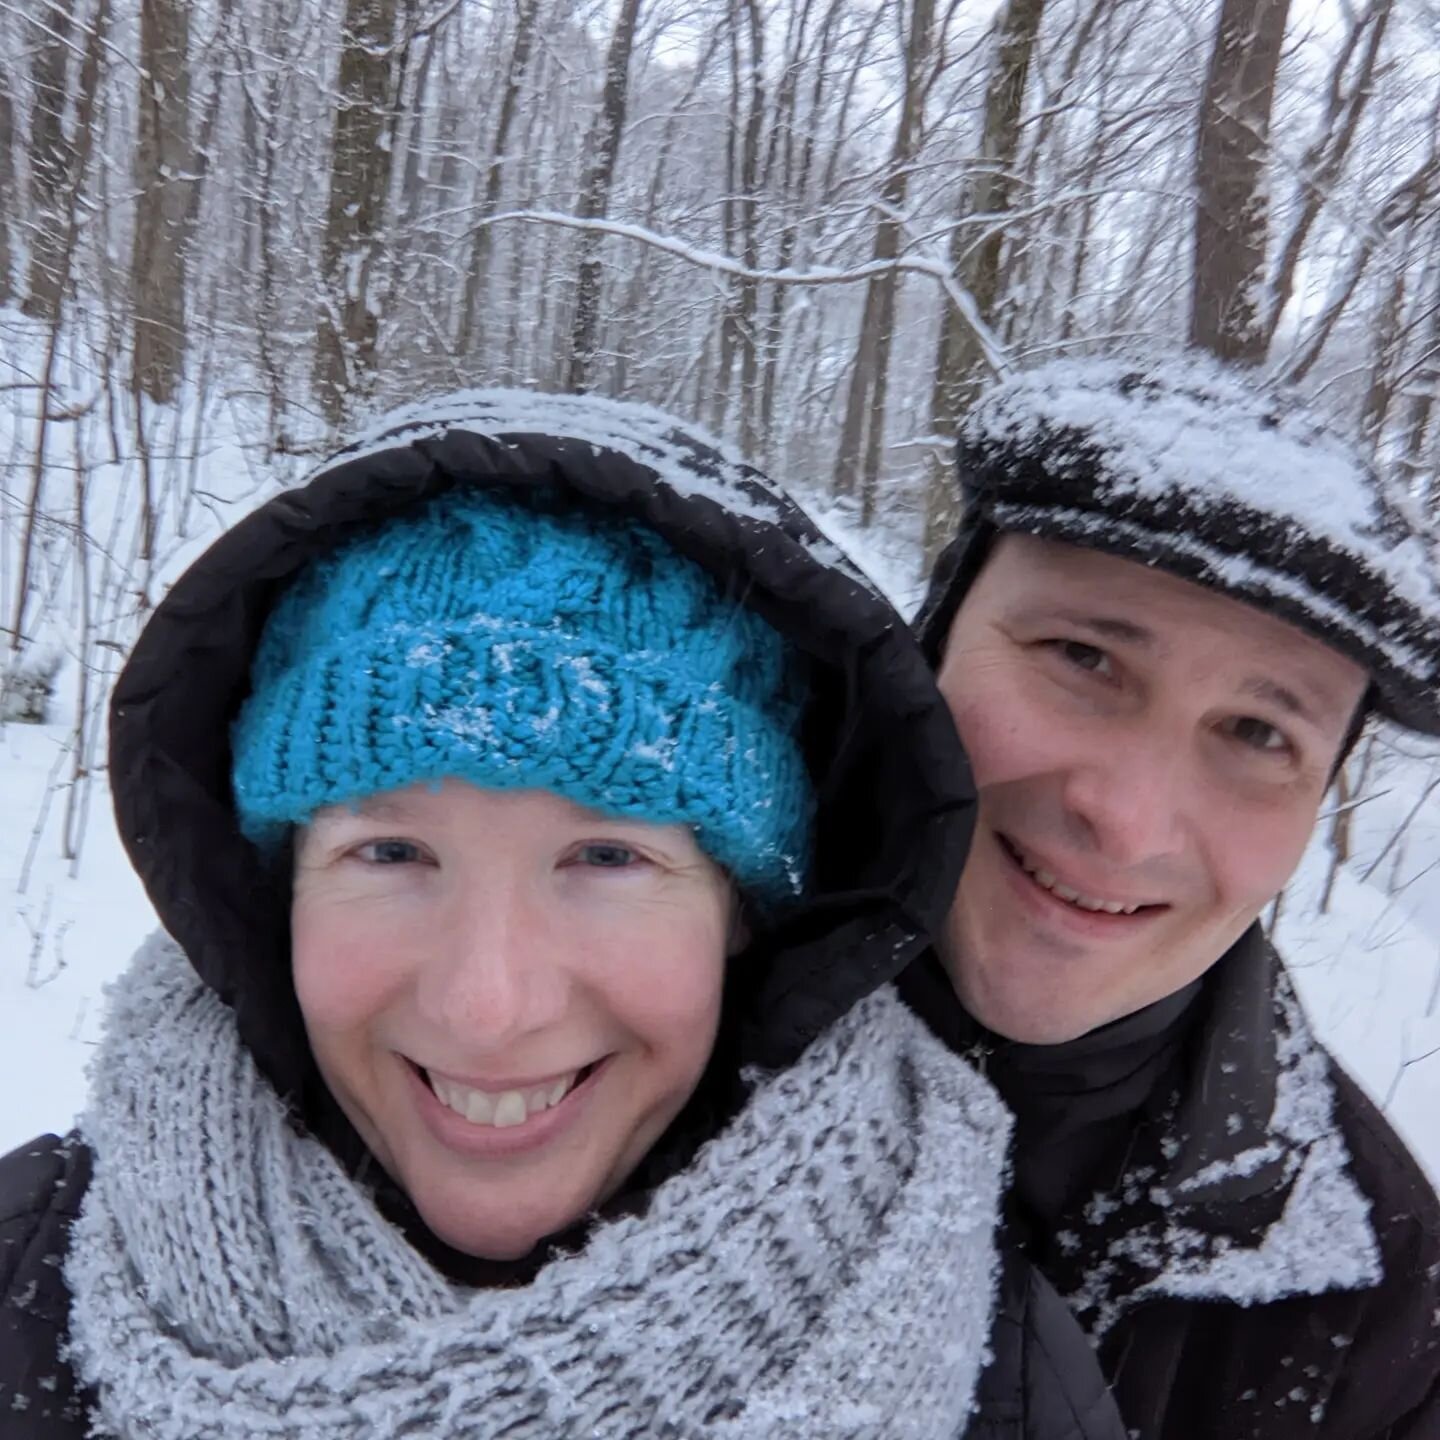 This past Sunday, we went on a brief but lovely Wintry walk, just in the area near our house. 
❄️🙂❄️ (w @nathanlloyd4245 )
.
#winter #winterwonderland #winterwoods #winterwoodland #snowy #snowywoods #freshair #prettysnowfall